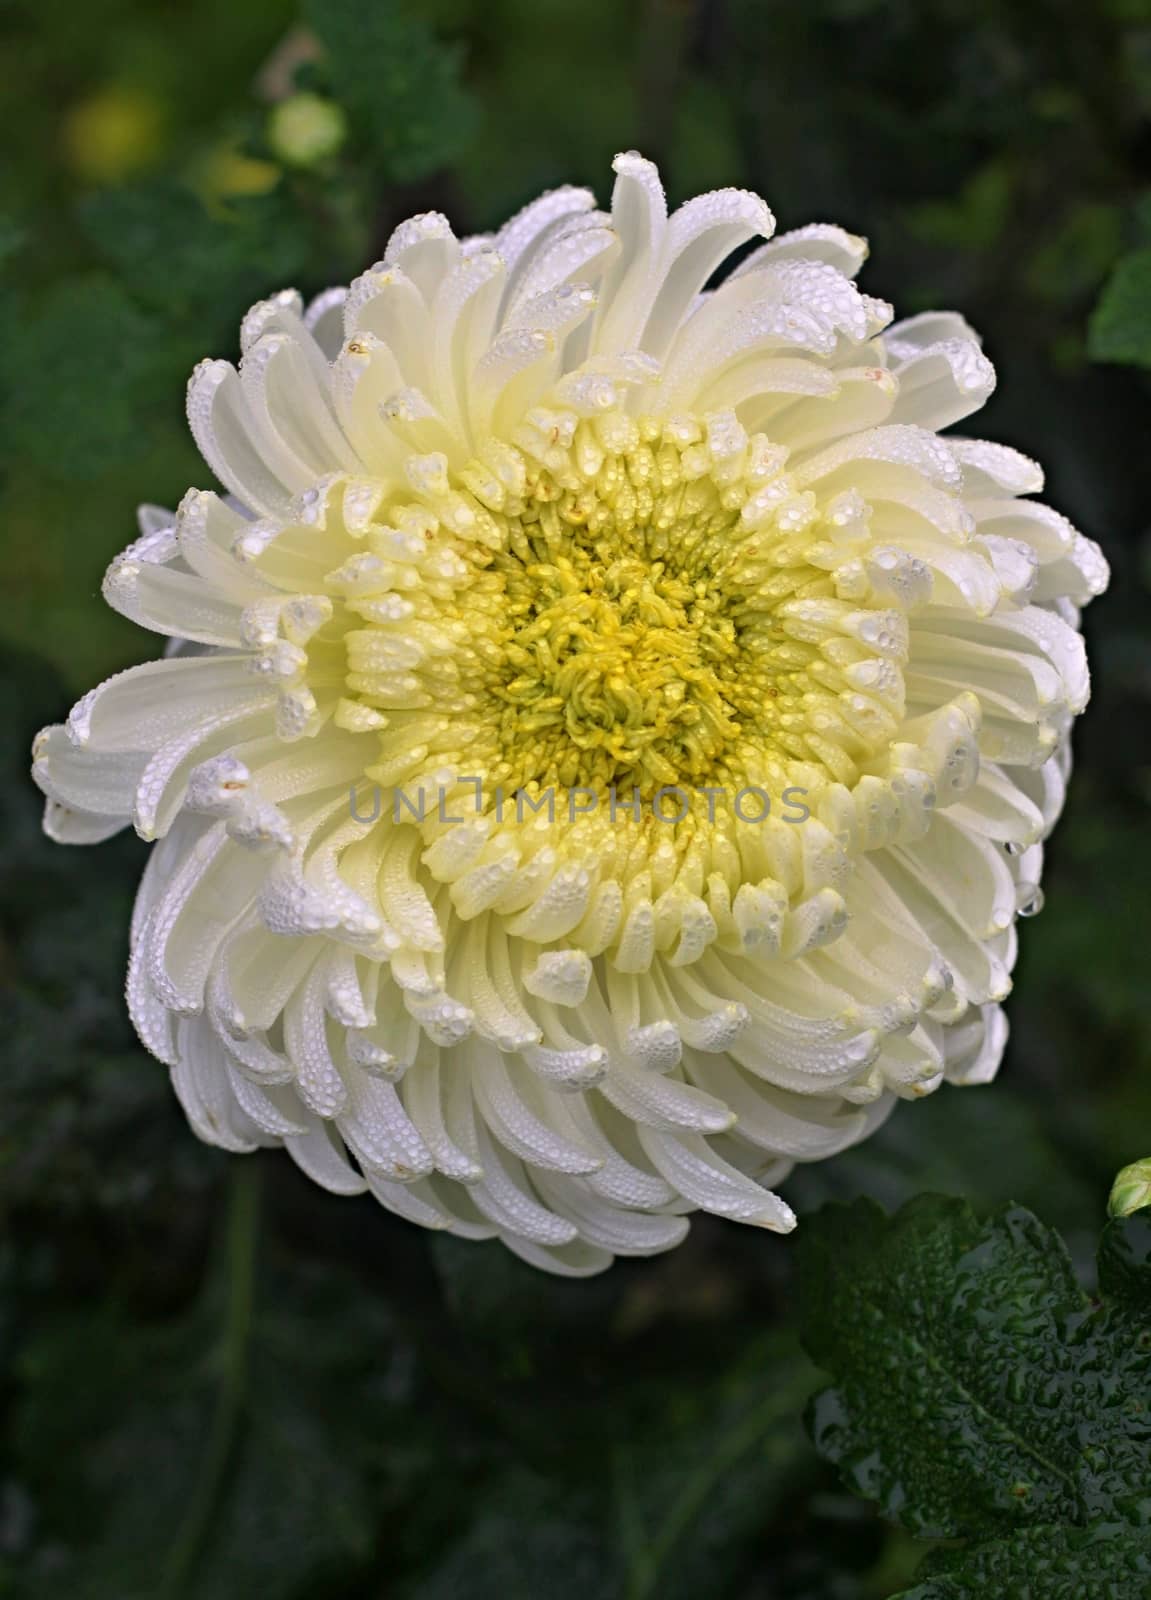 White/yellow dahlia in the rain and green leaves